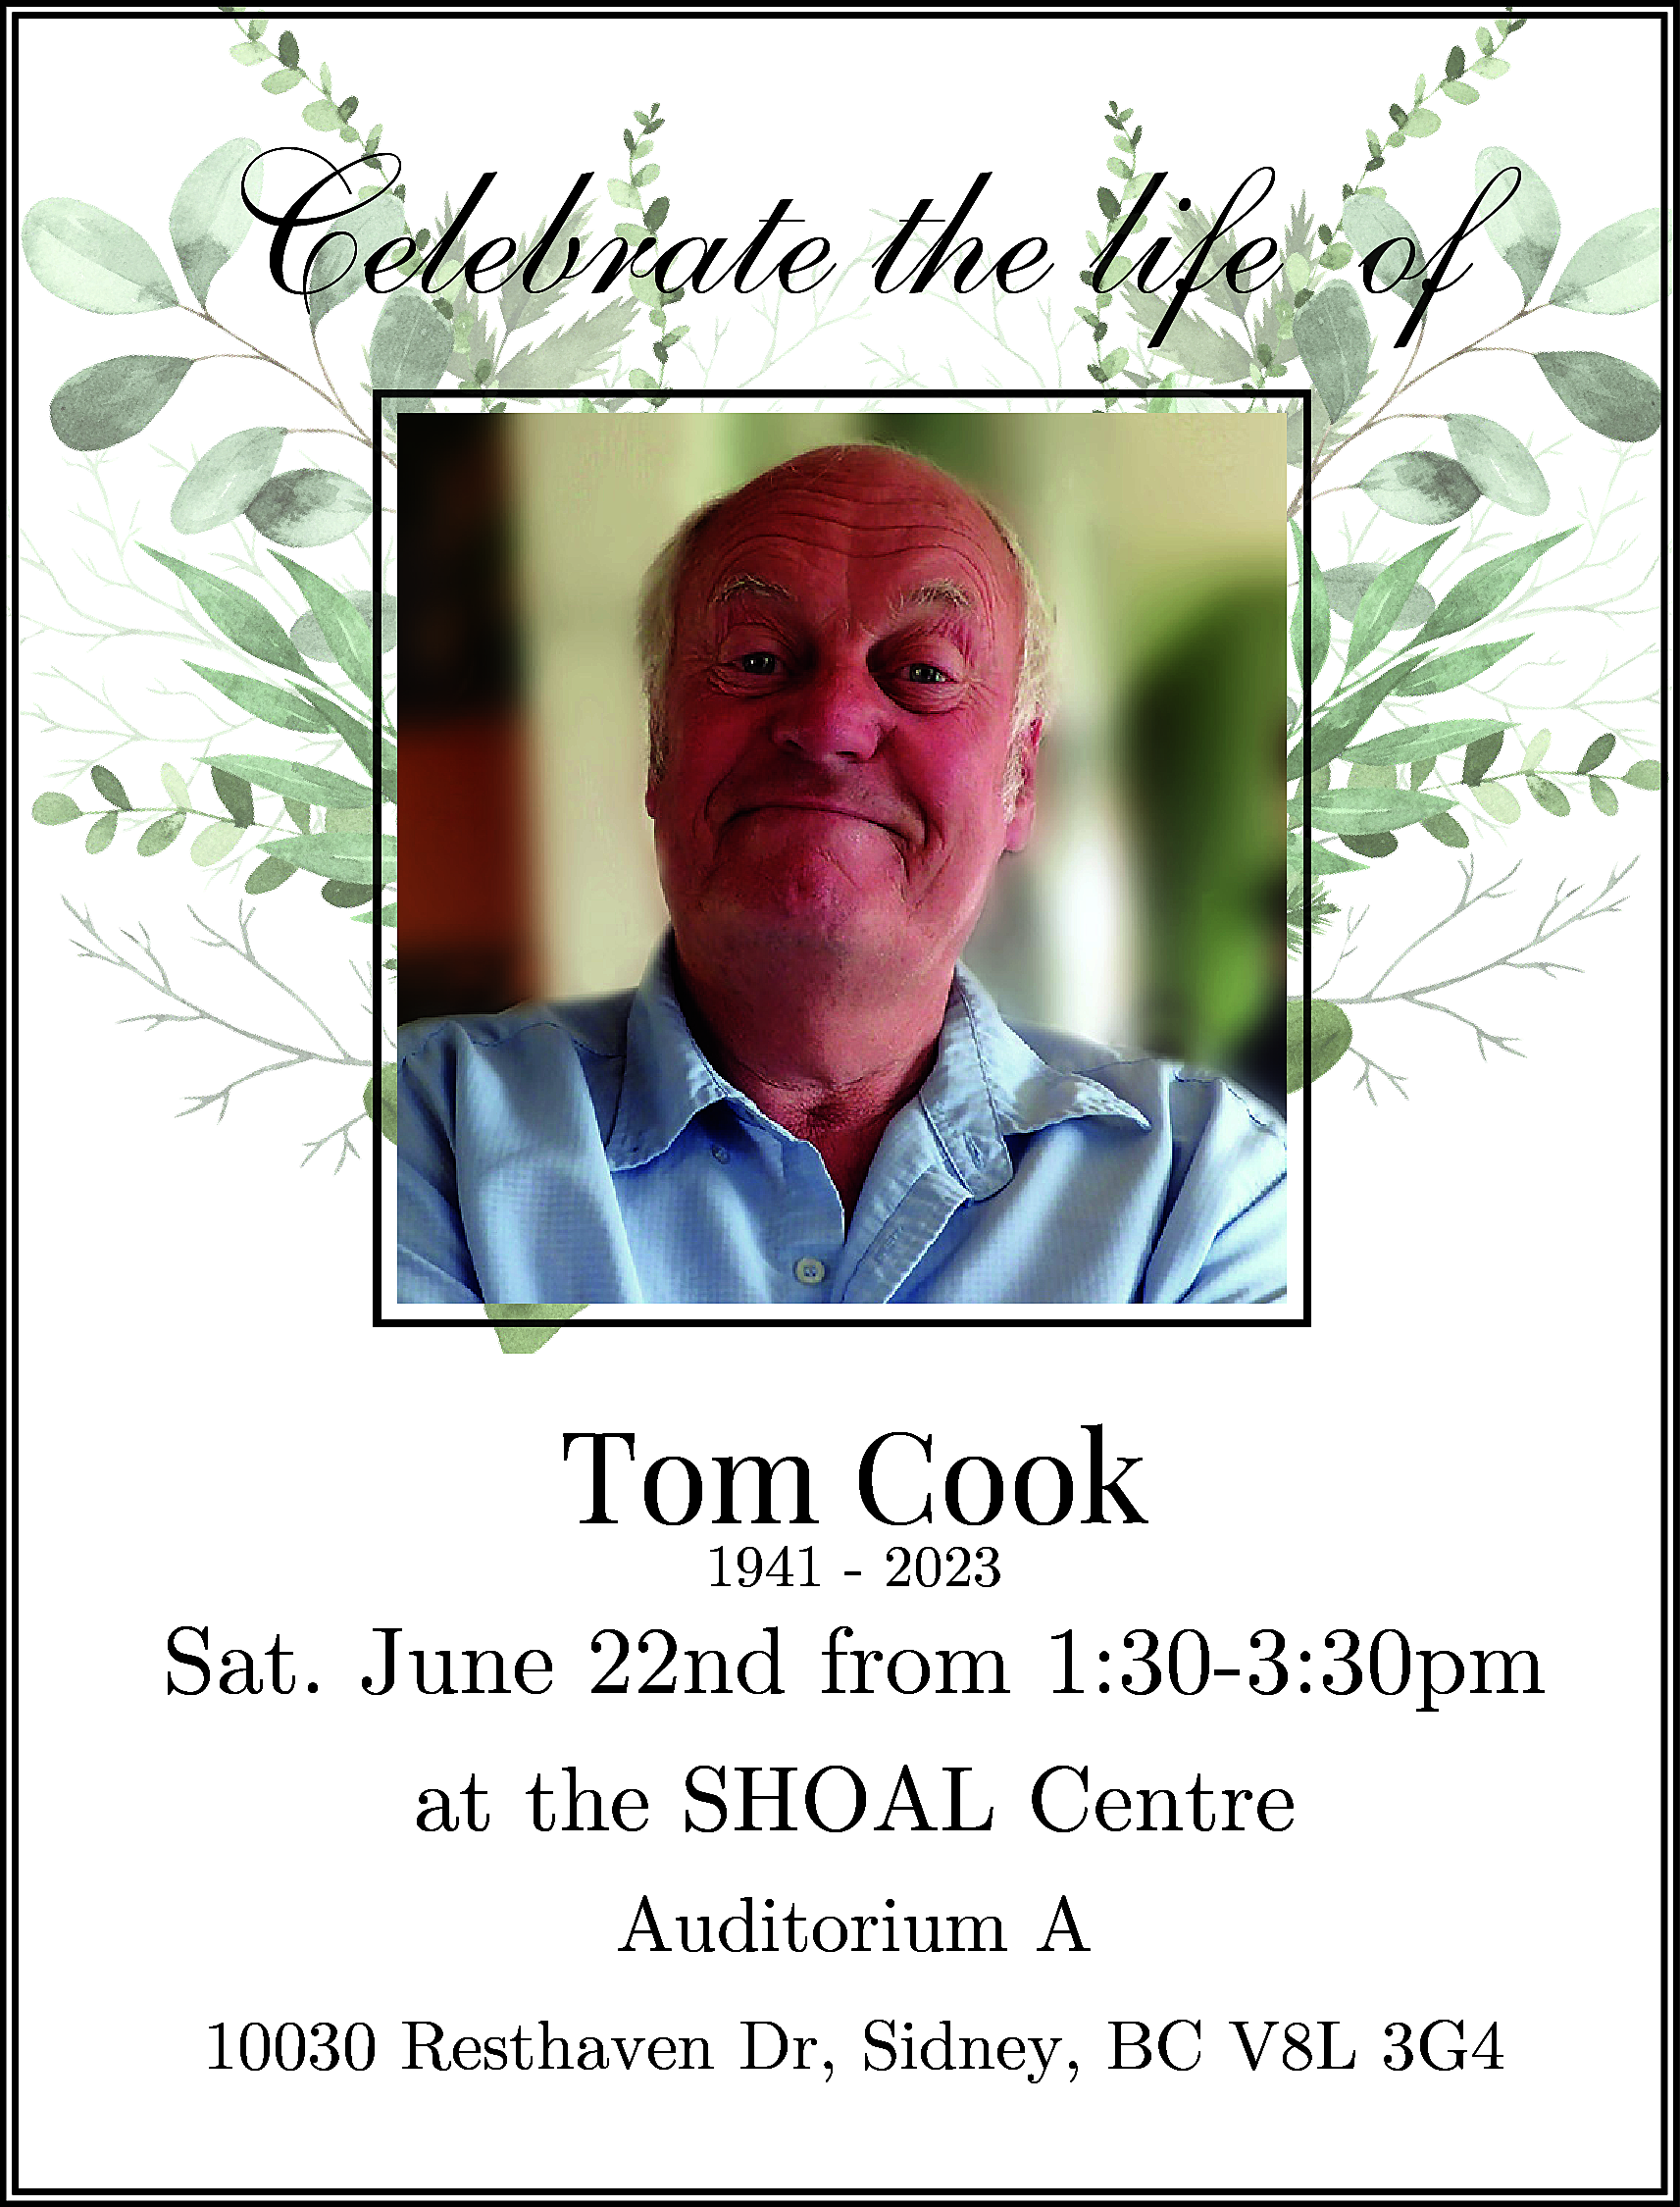 Celebrate the life of <br>Celebrate  Celebrate the life of  Celebrate the life of    Tom  Cook  Tom  Cook  1941 - 2023  1941 - 2023    June22nd  22nd from  from 1:30-3:30pm  Sat.Sat.  June  1:30-3:30pm  theSHOAL  SHOAL Centre  atatthe  Centre  Auditorium A    Auditorium A    10030 Resthaven Dr, Sidney, BC V8L 3G4    10030 Resthaven Dr, Sidney, BC V8L 3G4    